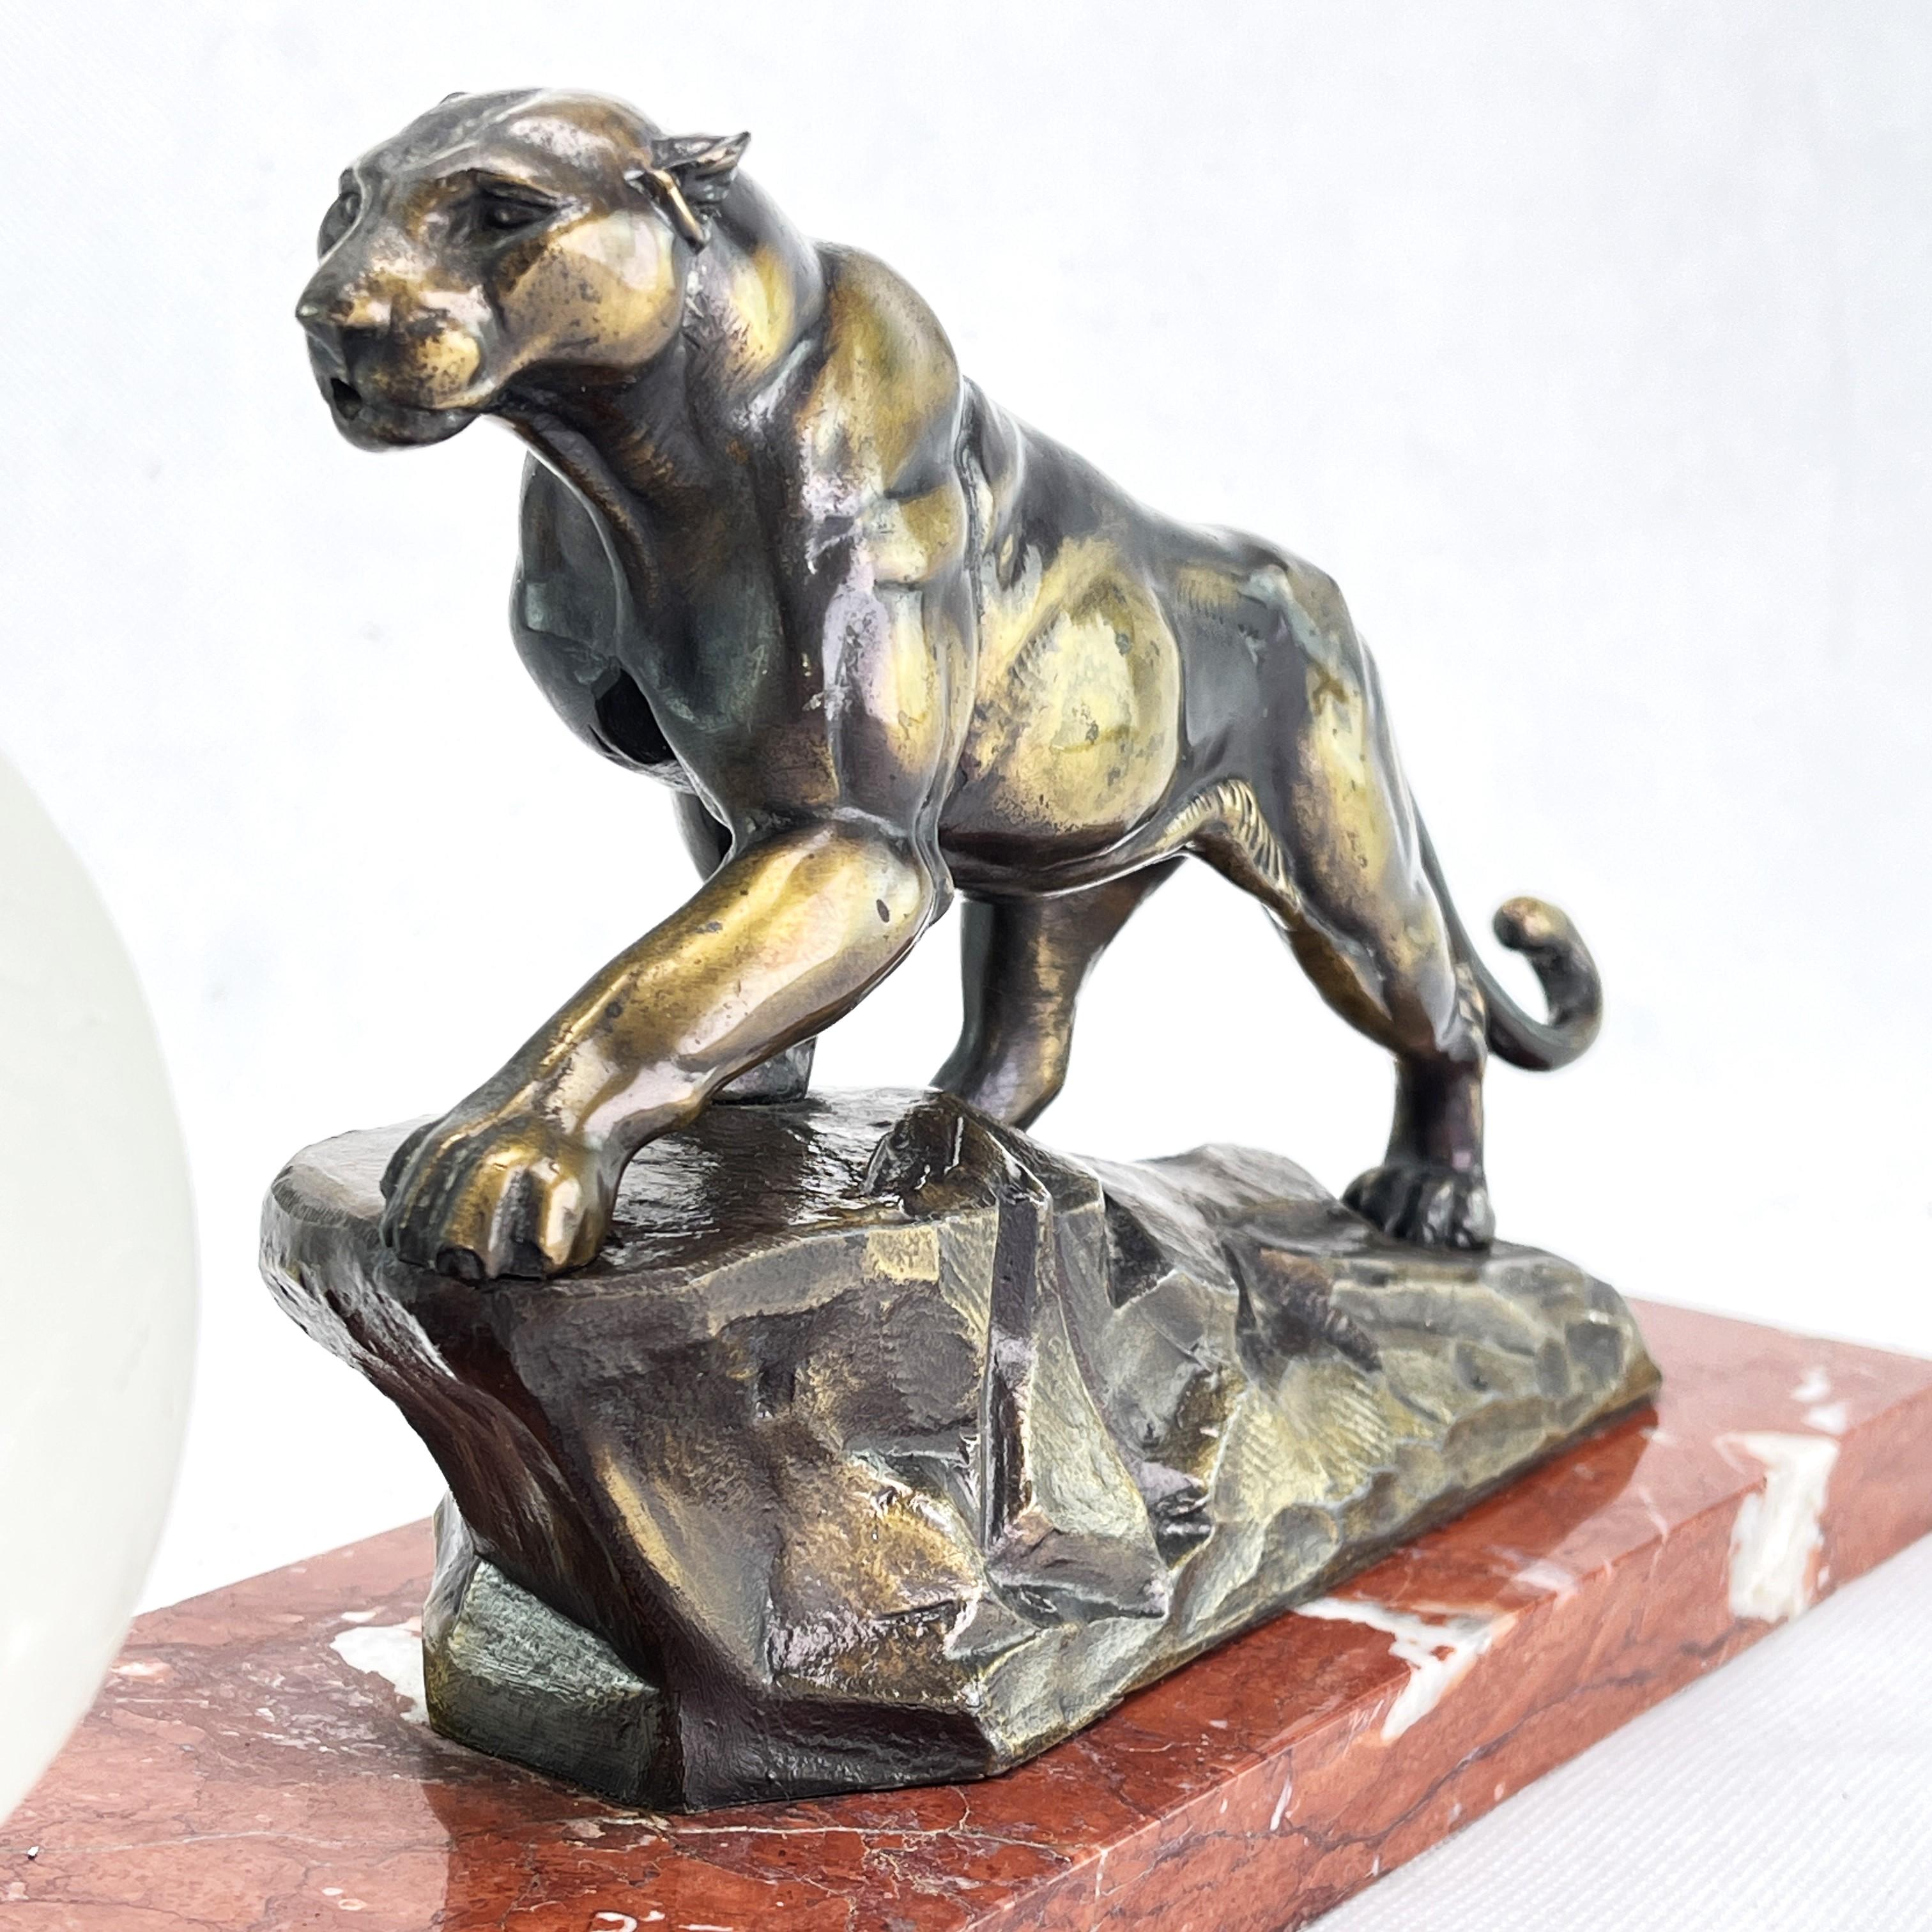 Art Deco panther sculpture table lamp - 1930s.

This unique, original table lamp captivates with its simple, no-nonsense Art Deco design. It was designed in the typical style of Art Deco, an artistic design movement known for its geometric shapes,